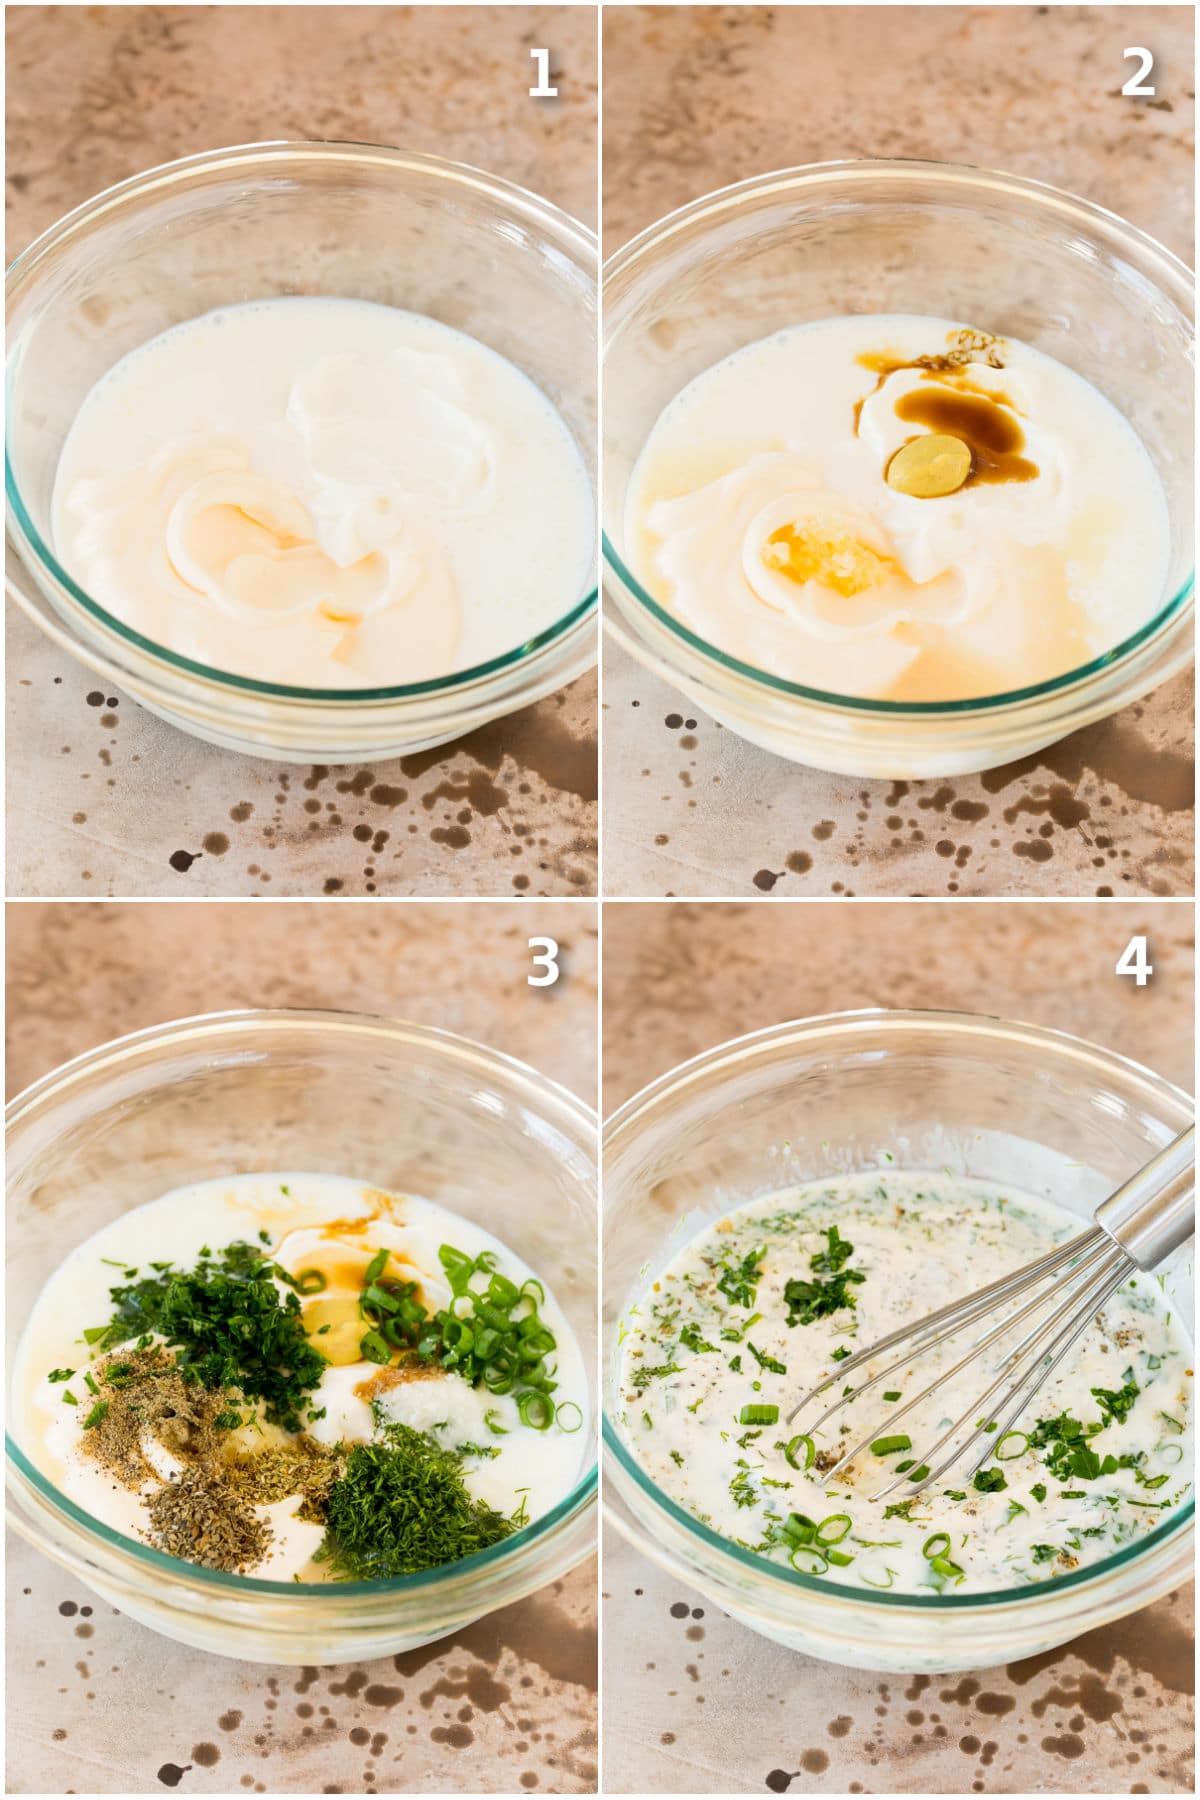 Step by step shots showing how to make ranch dressing.